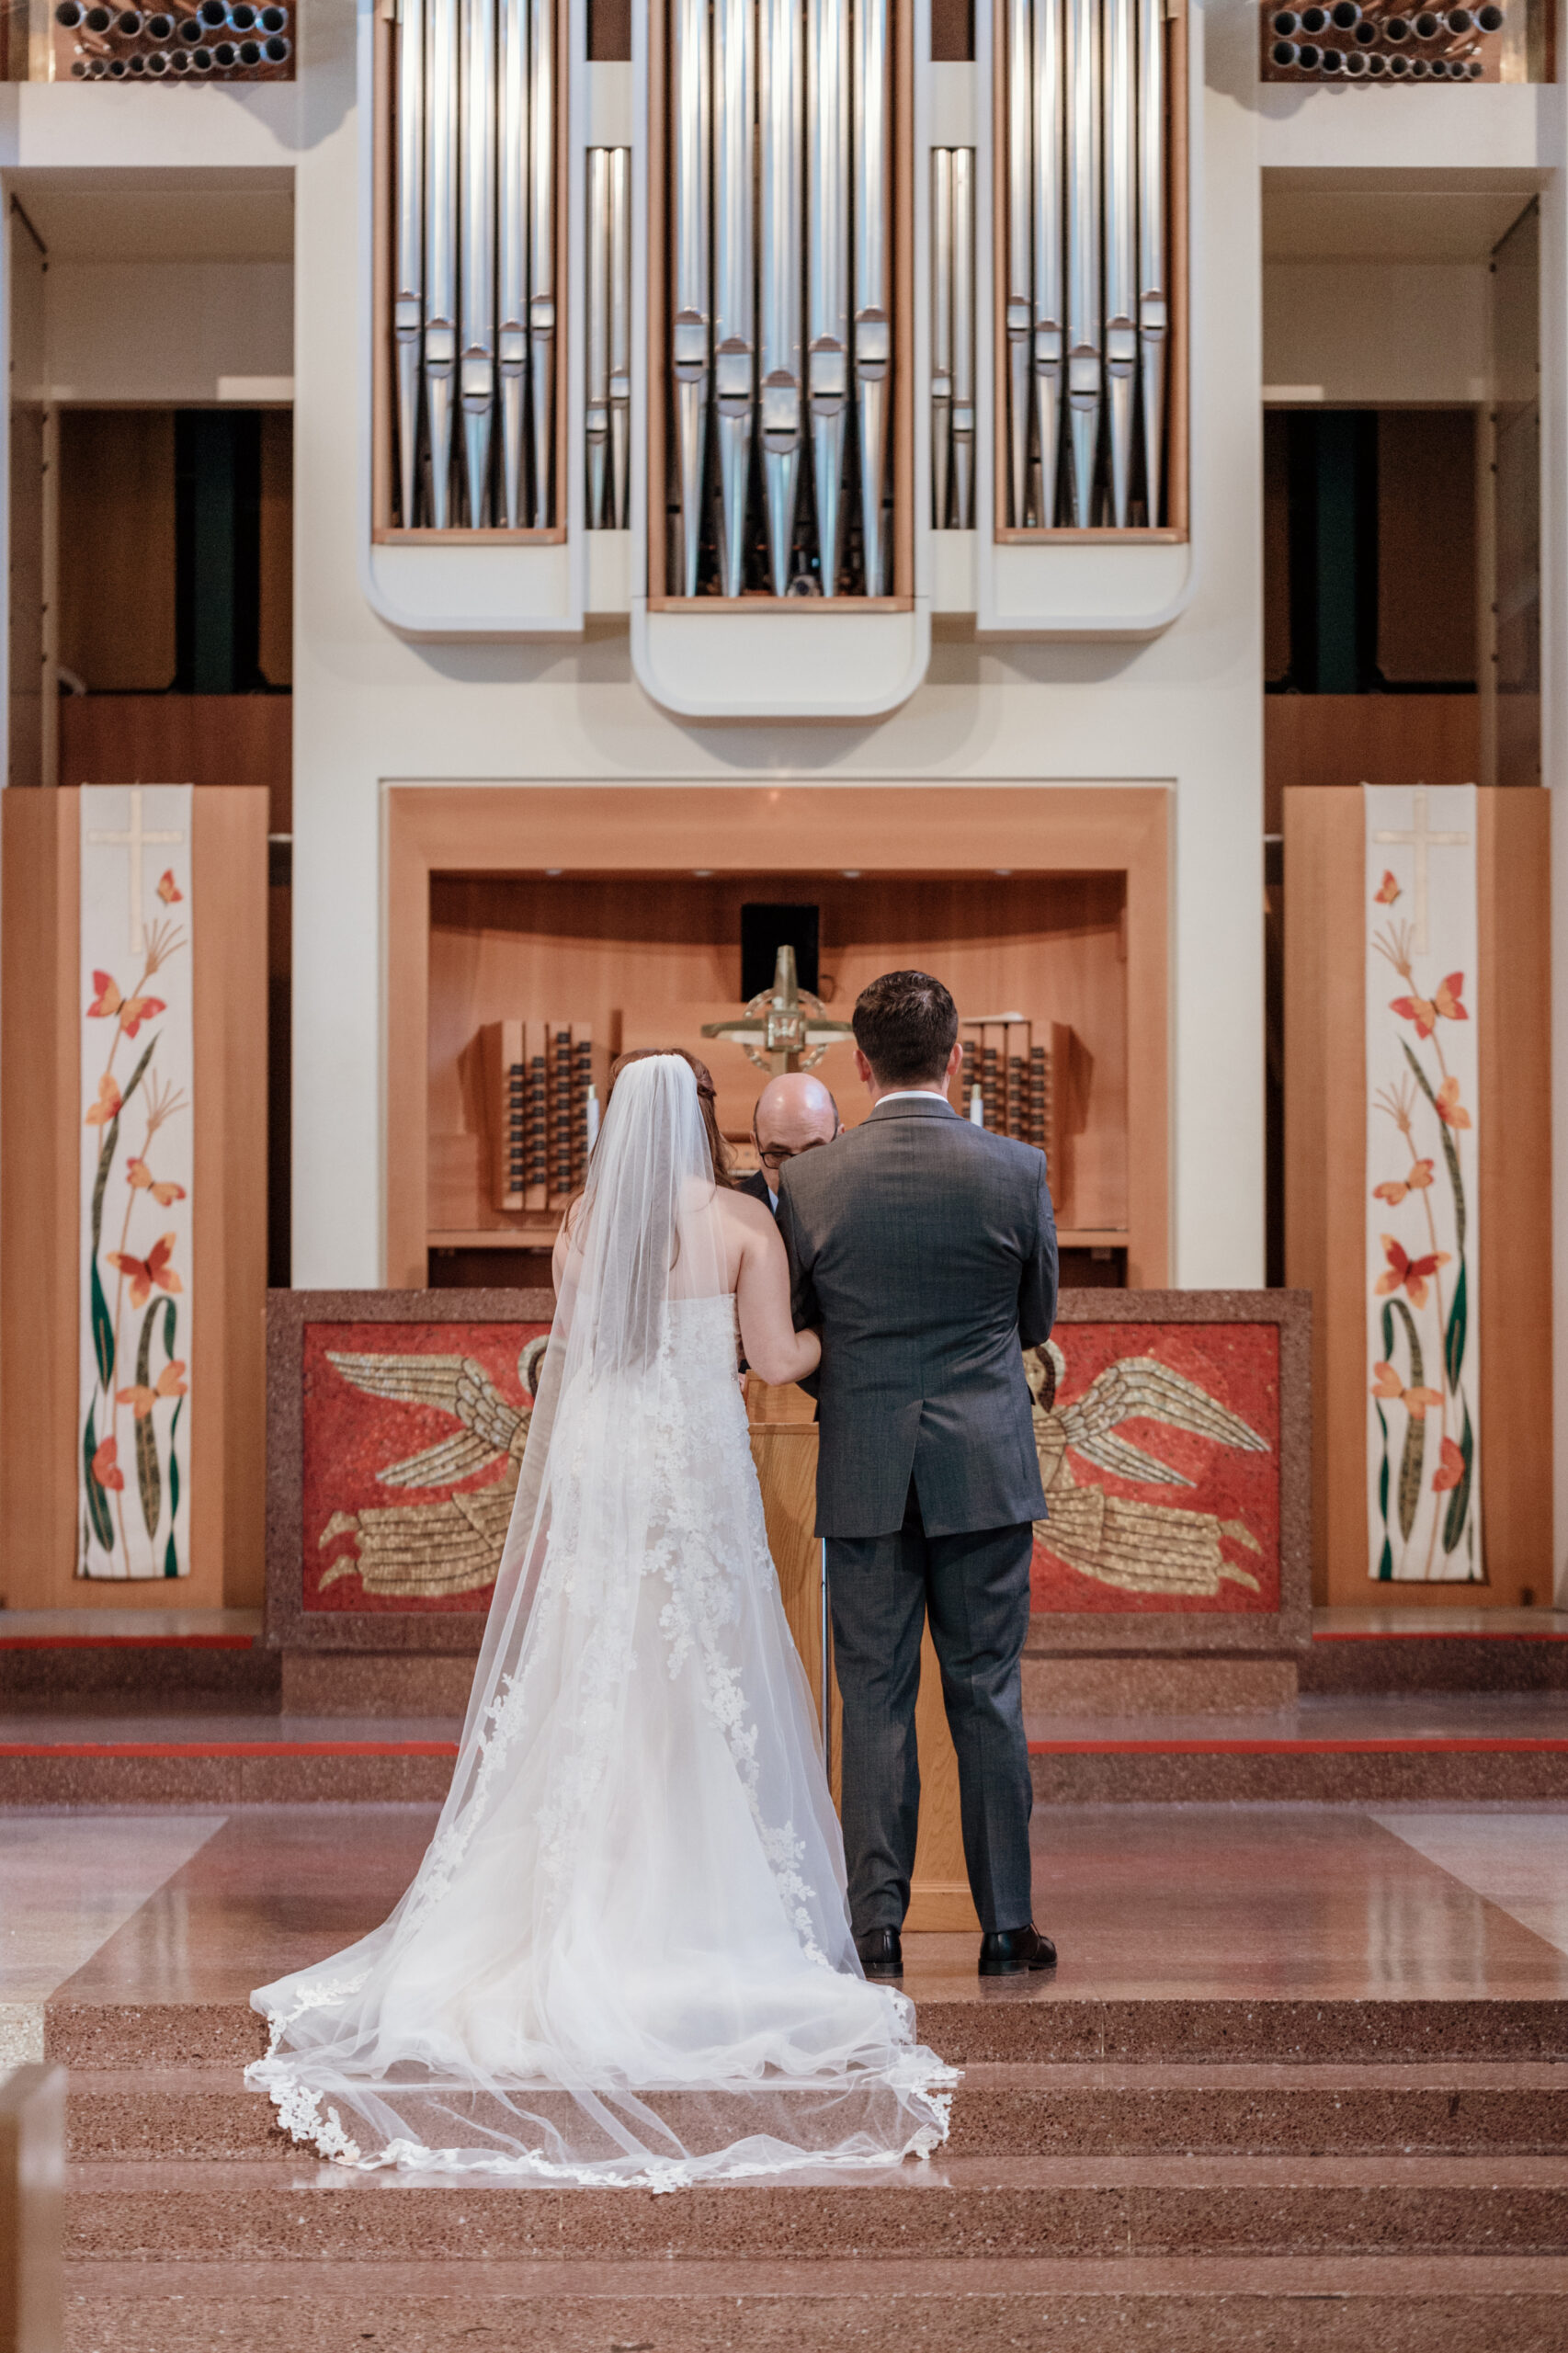 A bride and groom standing at the altar, in front of a huge pipe organ